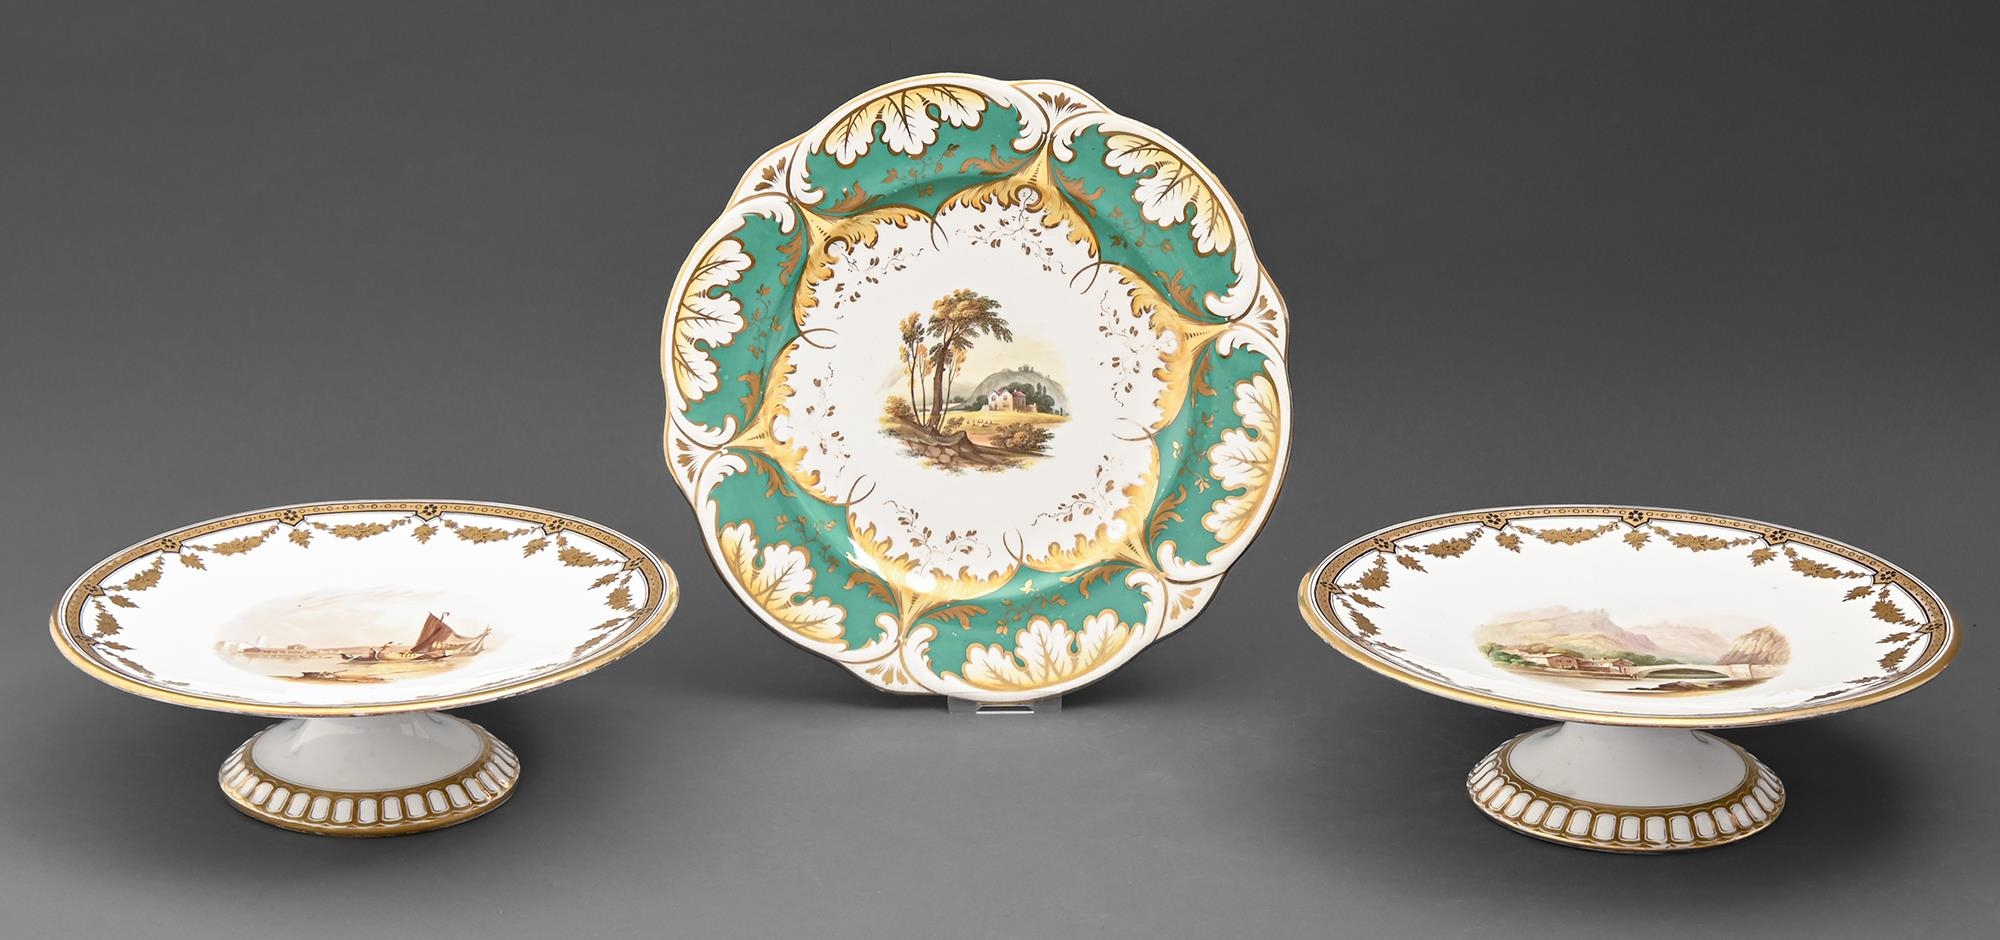 A pair of Minton fruit stands, with painted landscapes and Rockingham plate, 23cm diam (3) Plate